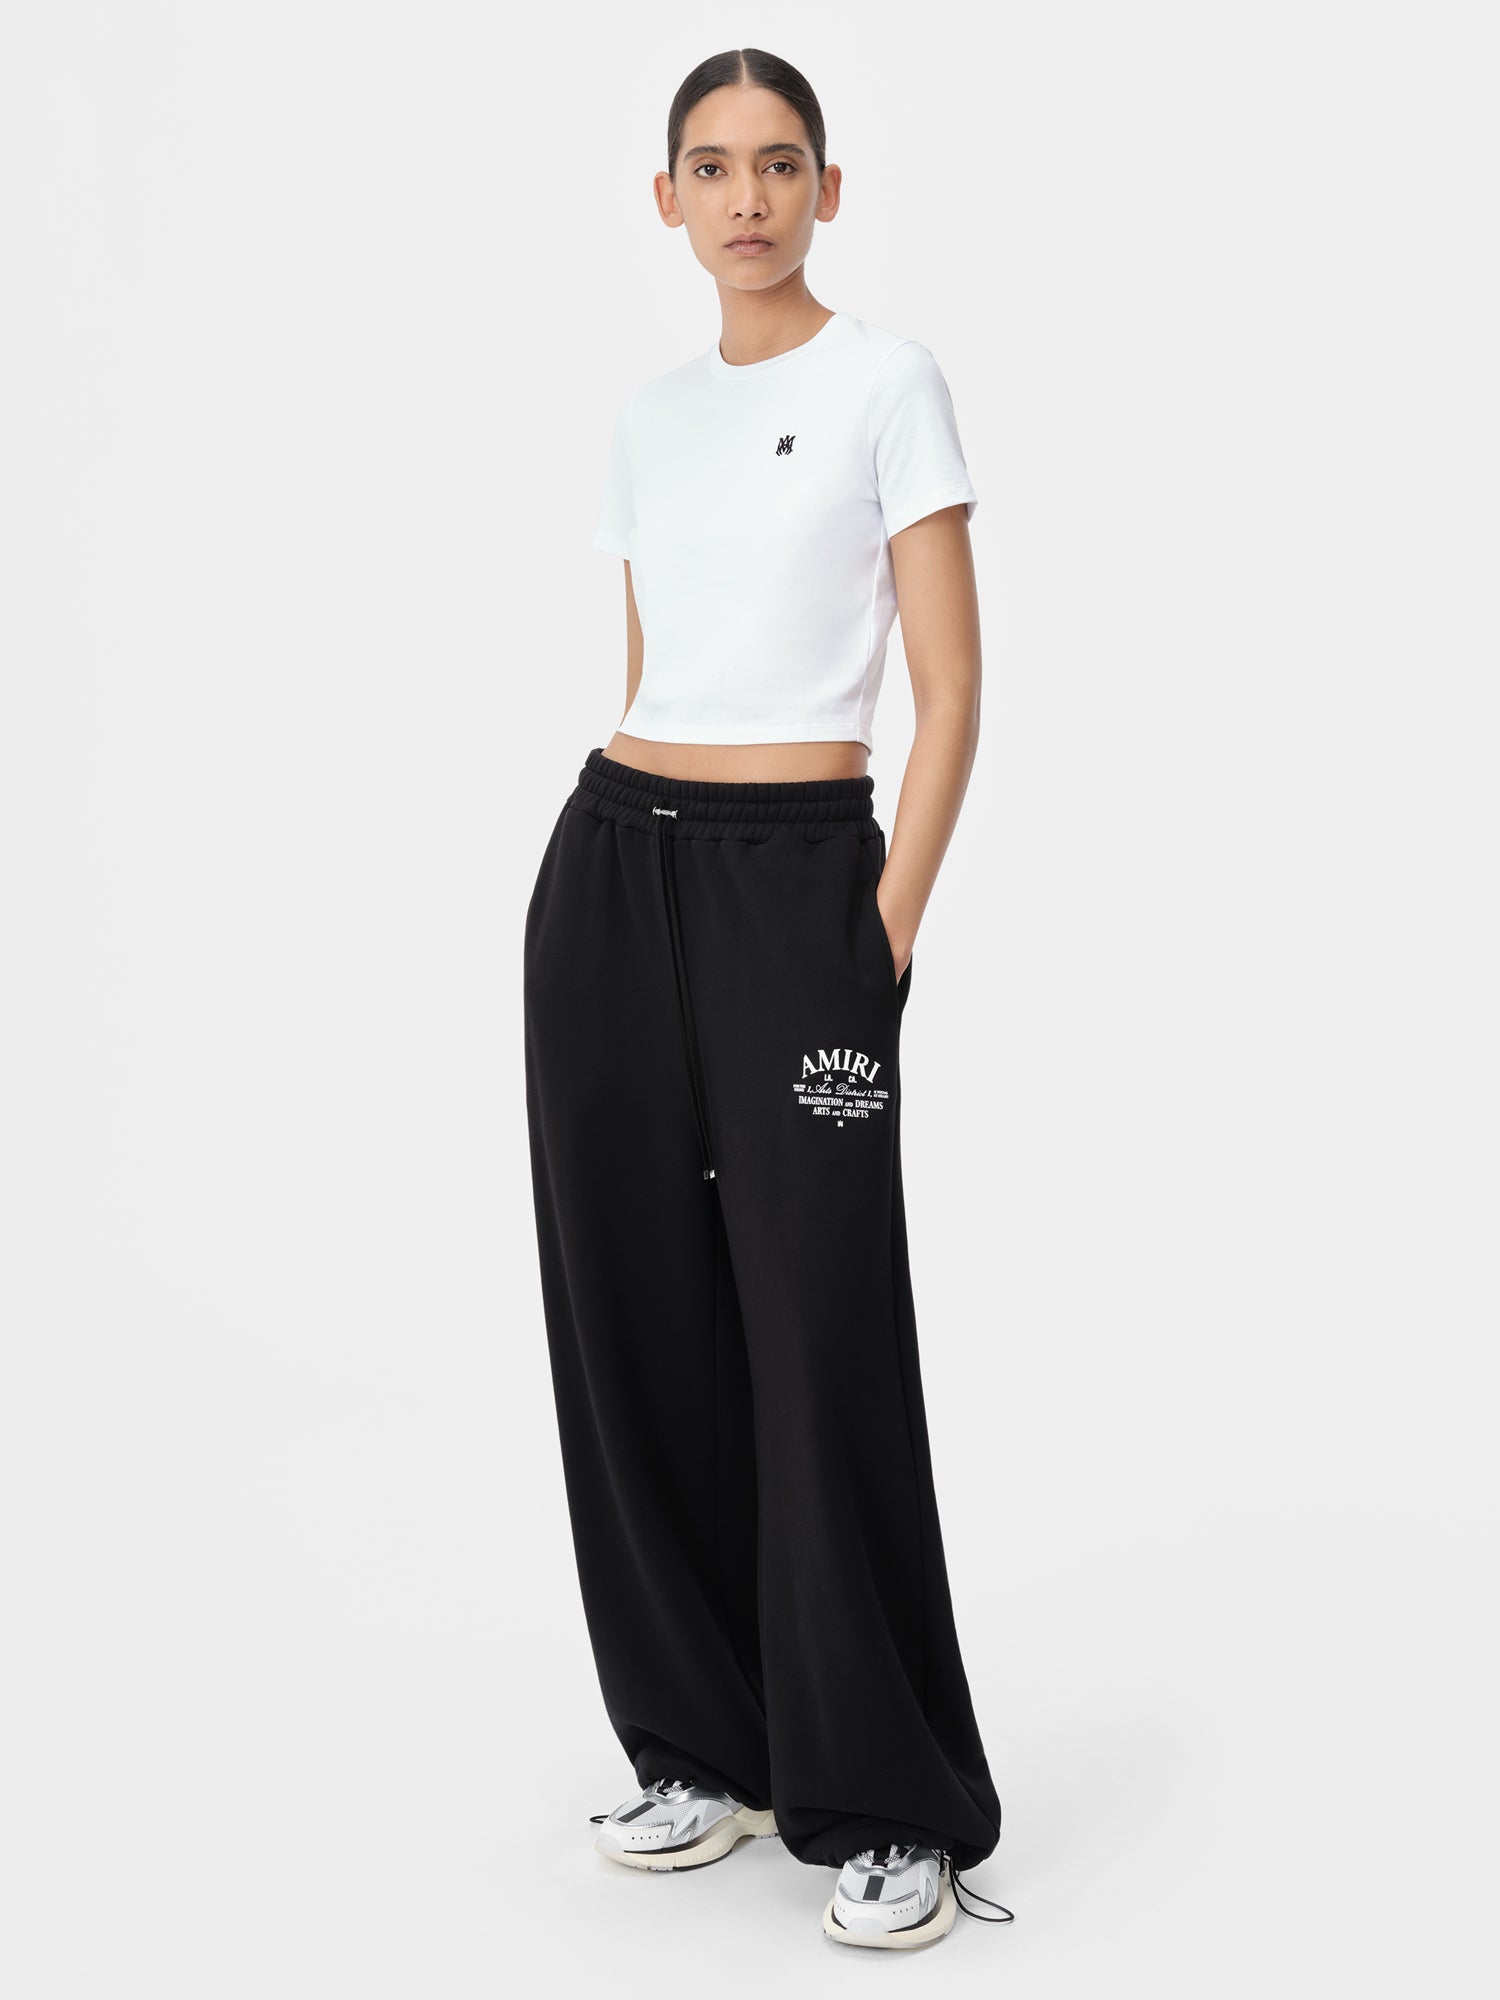 Product WOMEN - WOMEN'S ARTS DISTRICT FLARE SWEATPANT - Black featured image